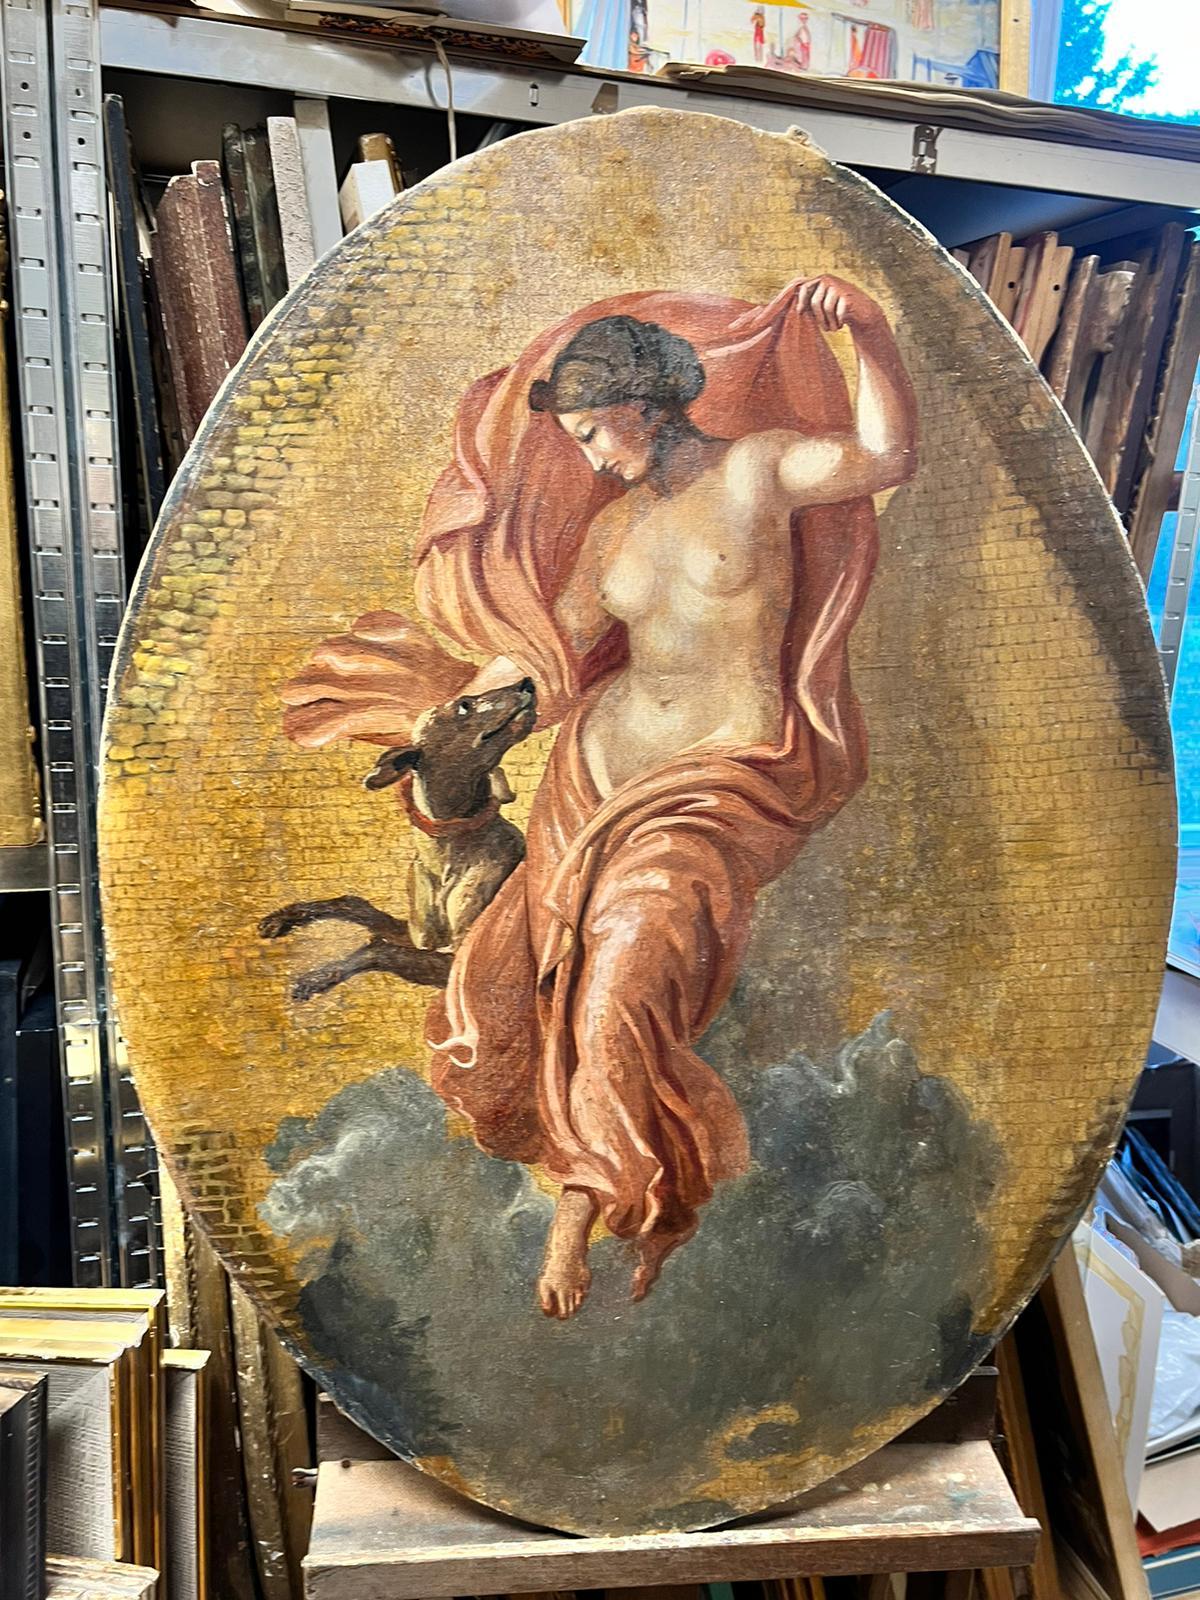 Fine Antique Classical Nude Draped in Robes Dancing with Dog Gold Background - Painting by Italian 19th C